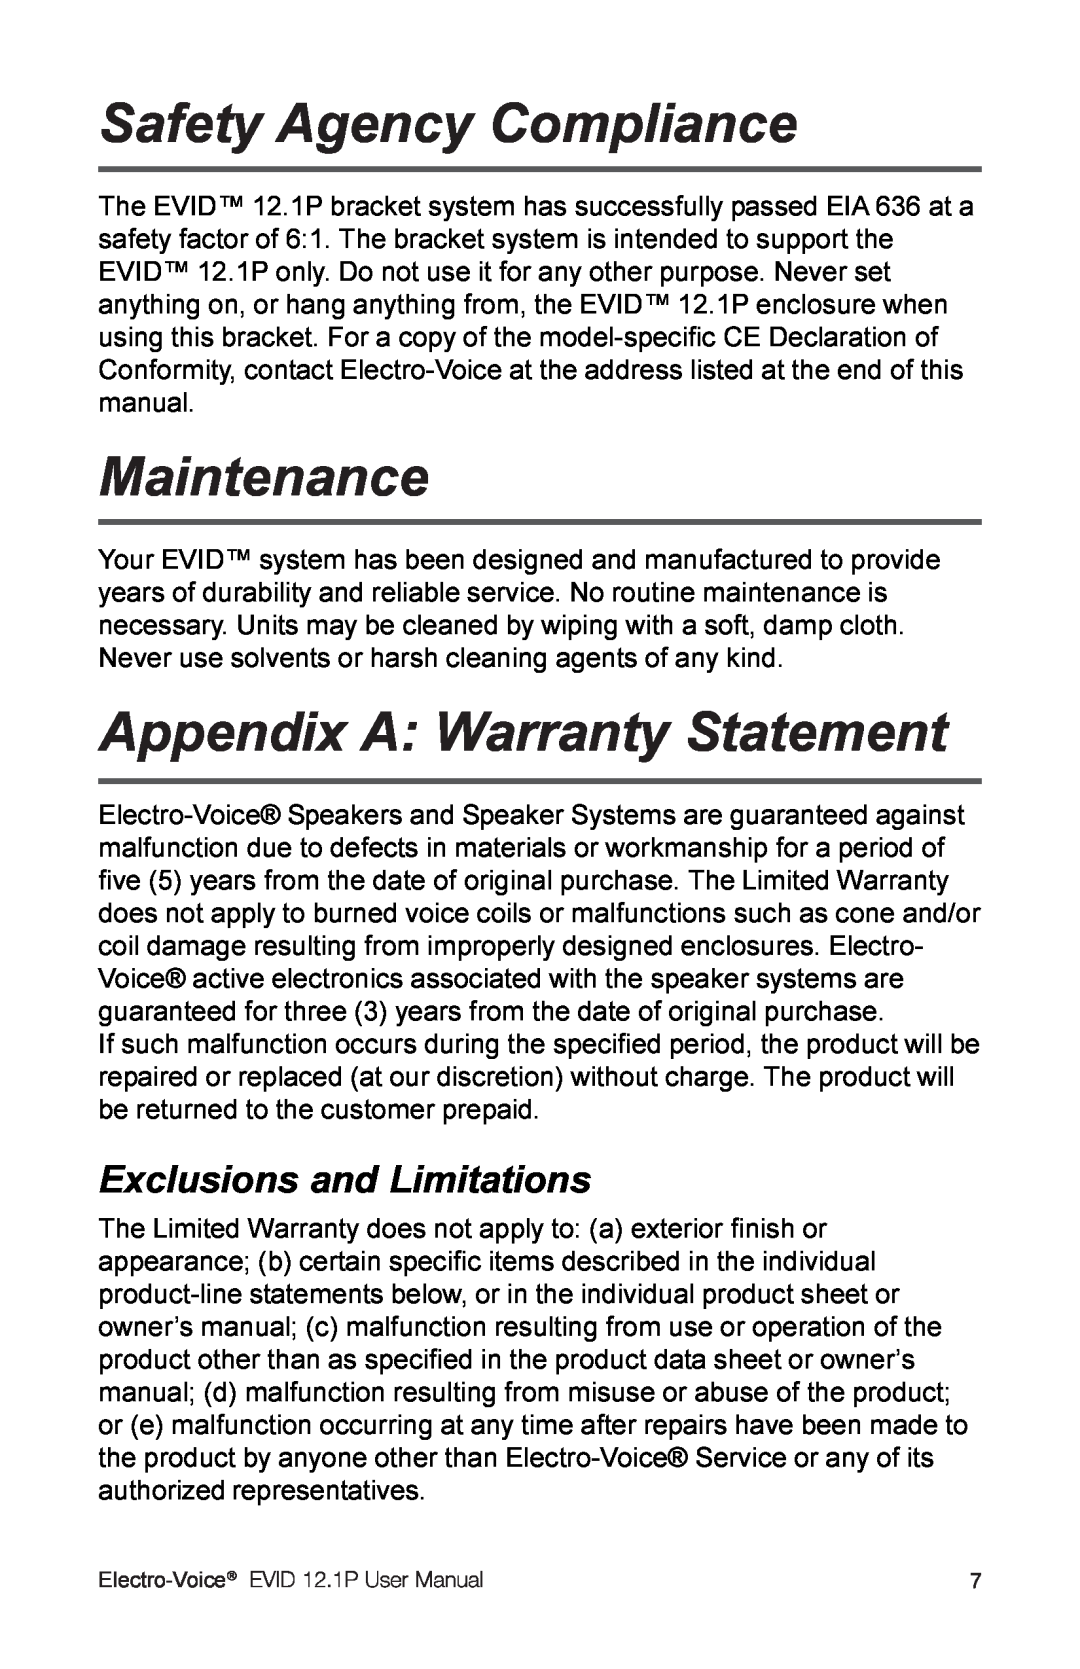 Electro-Voice 2.1P Safety Agency Compliance, Maintenance, Appendix A Warranty Statement, Exclusions and Limitations 